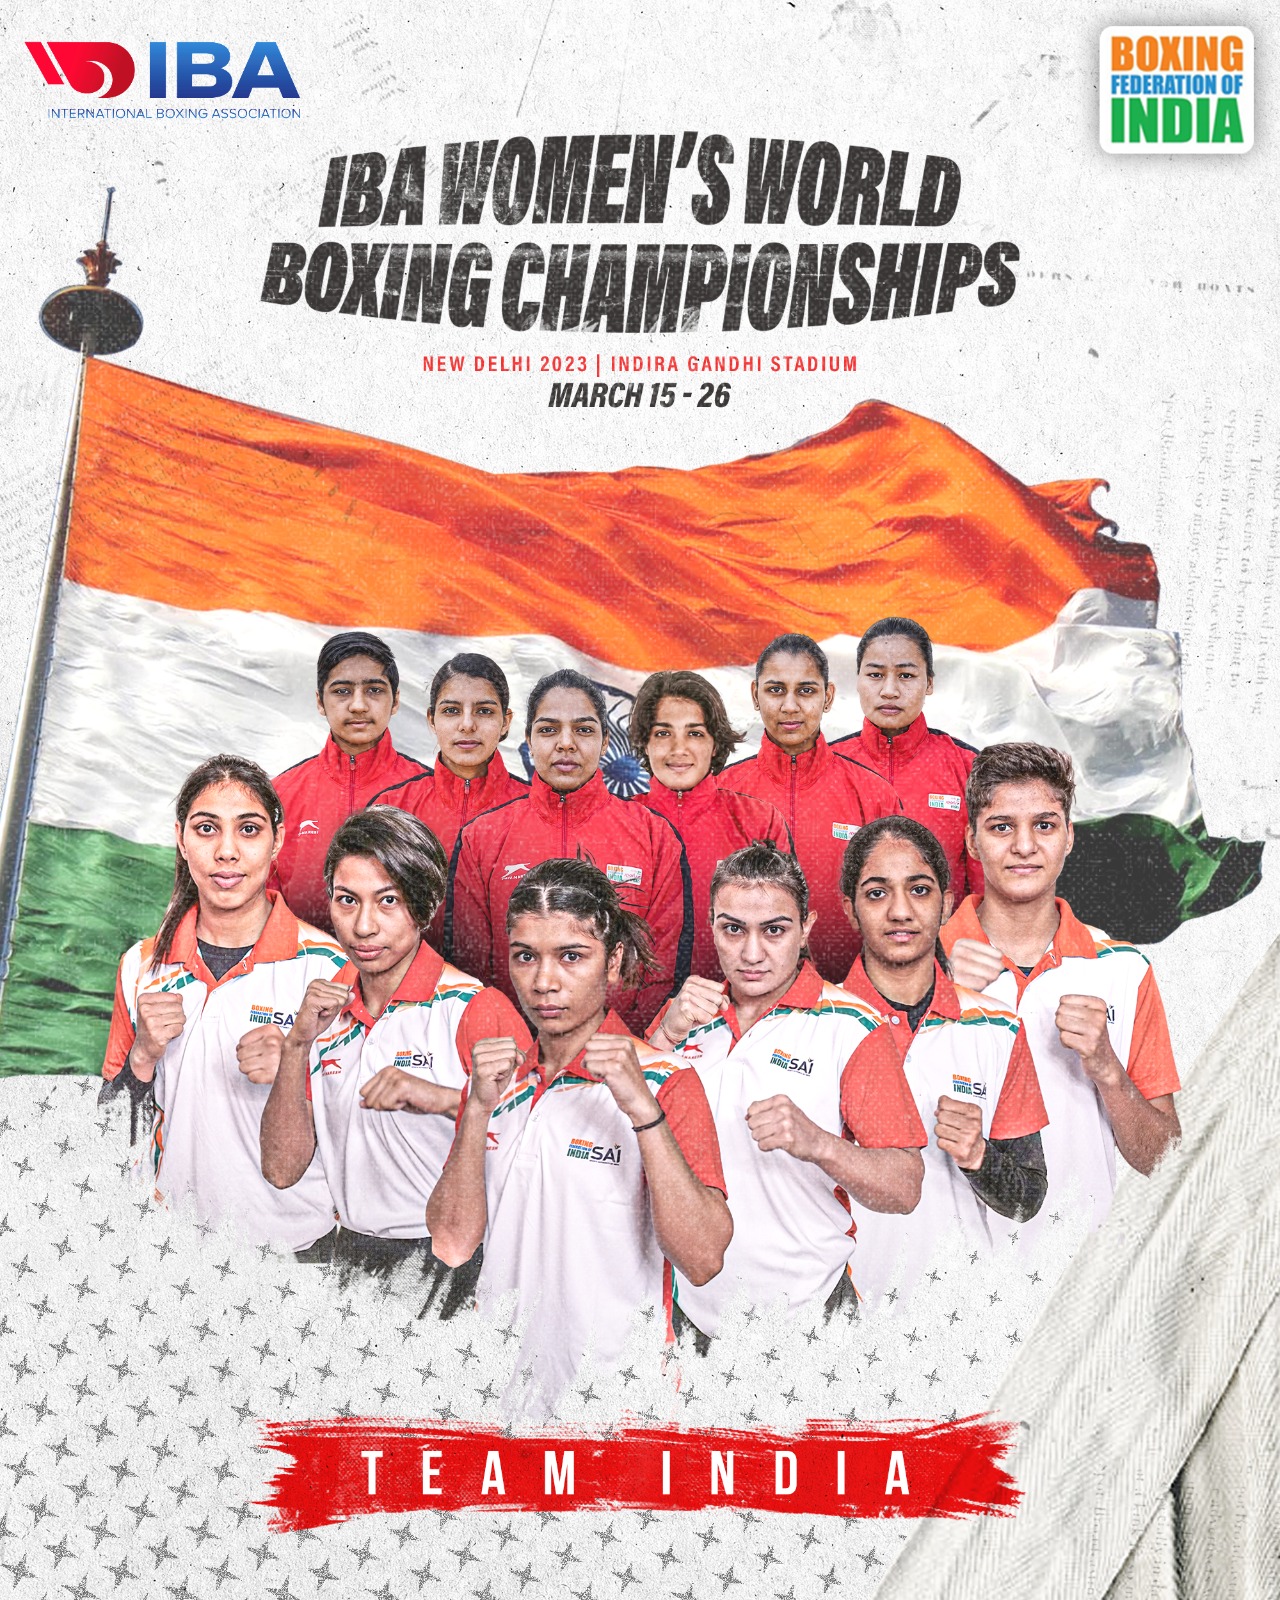 BFI ready to punch its way to glory with 12 member Indian squad for IBA